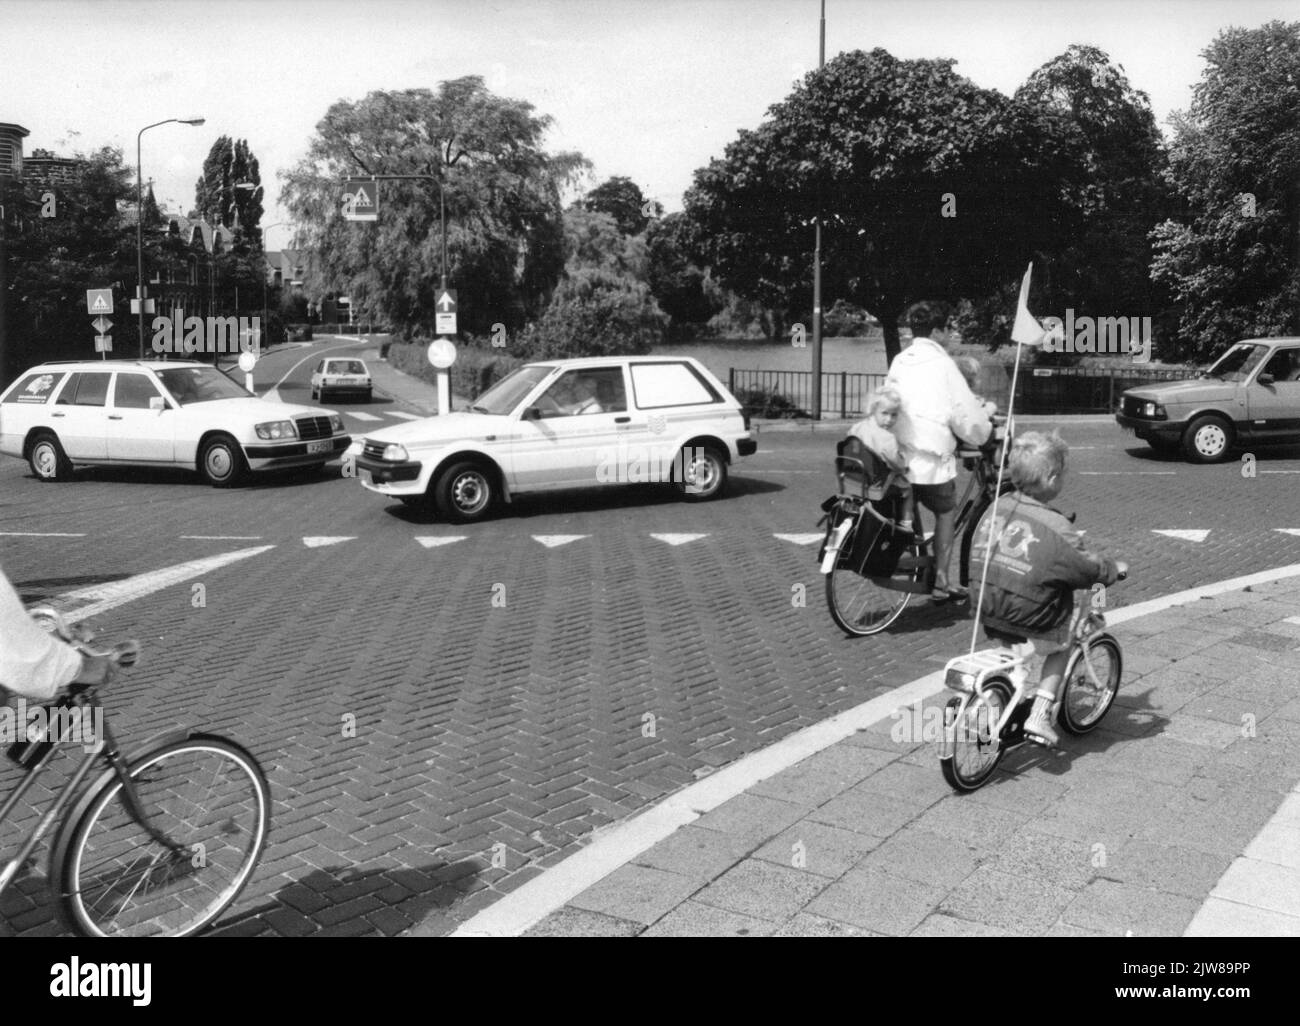 Image of the unsafe traffic situation for cyclists at the Singel intersection (foreground) - Westdam (right) - Zandwijksingel (background) in Woerden. Stock Photo